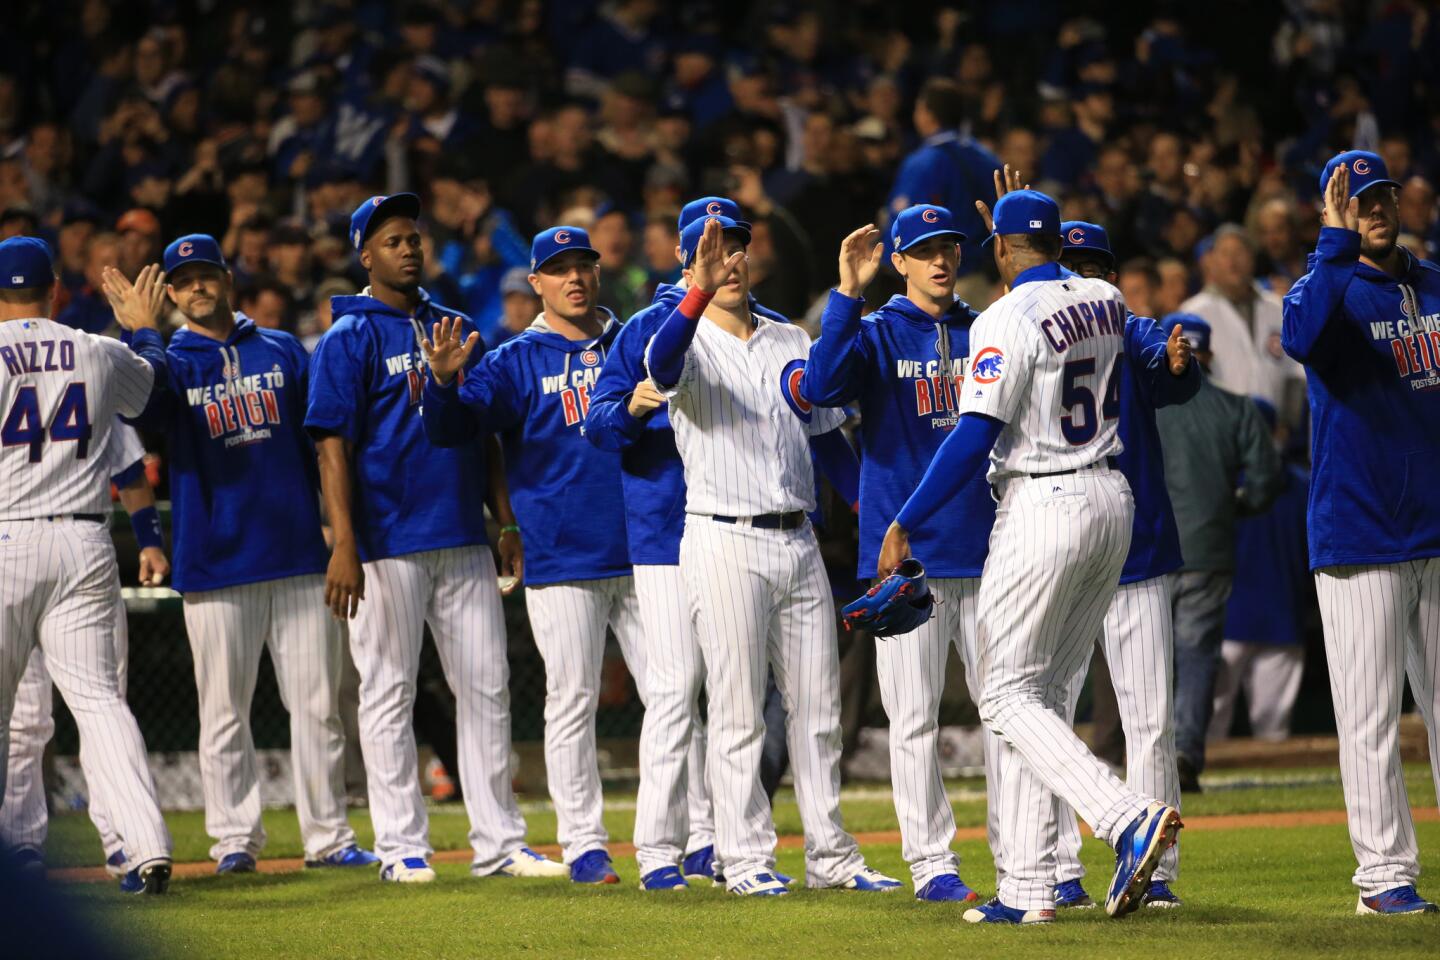 The Cubs celebrate their win against the Giants in Game 1 of the National League Division Series at Wrigley Field.